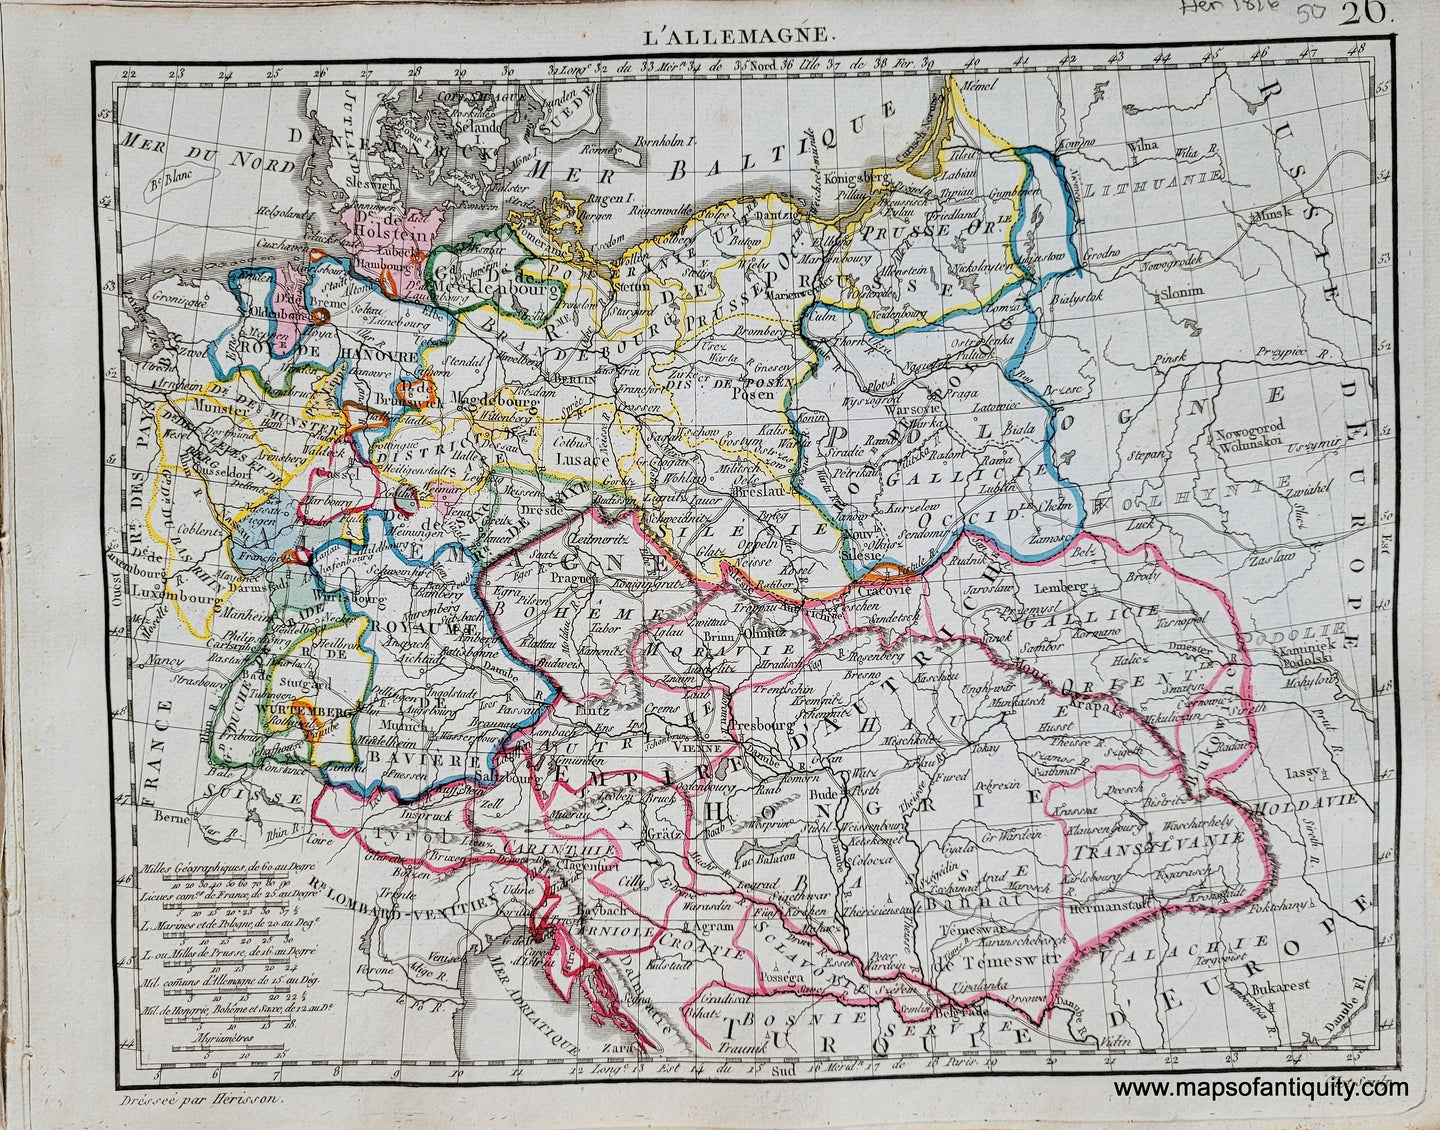 Genuine-Antique-Map-German-Empire-LAllemagne-Germany-Austria-Hungary-Poland-Prussia-1816-Herisson-Maps-Of-Antiquity-1800s-19th-century